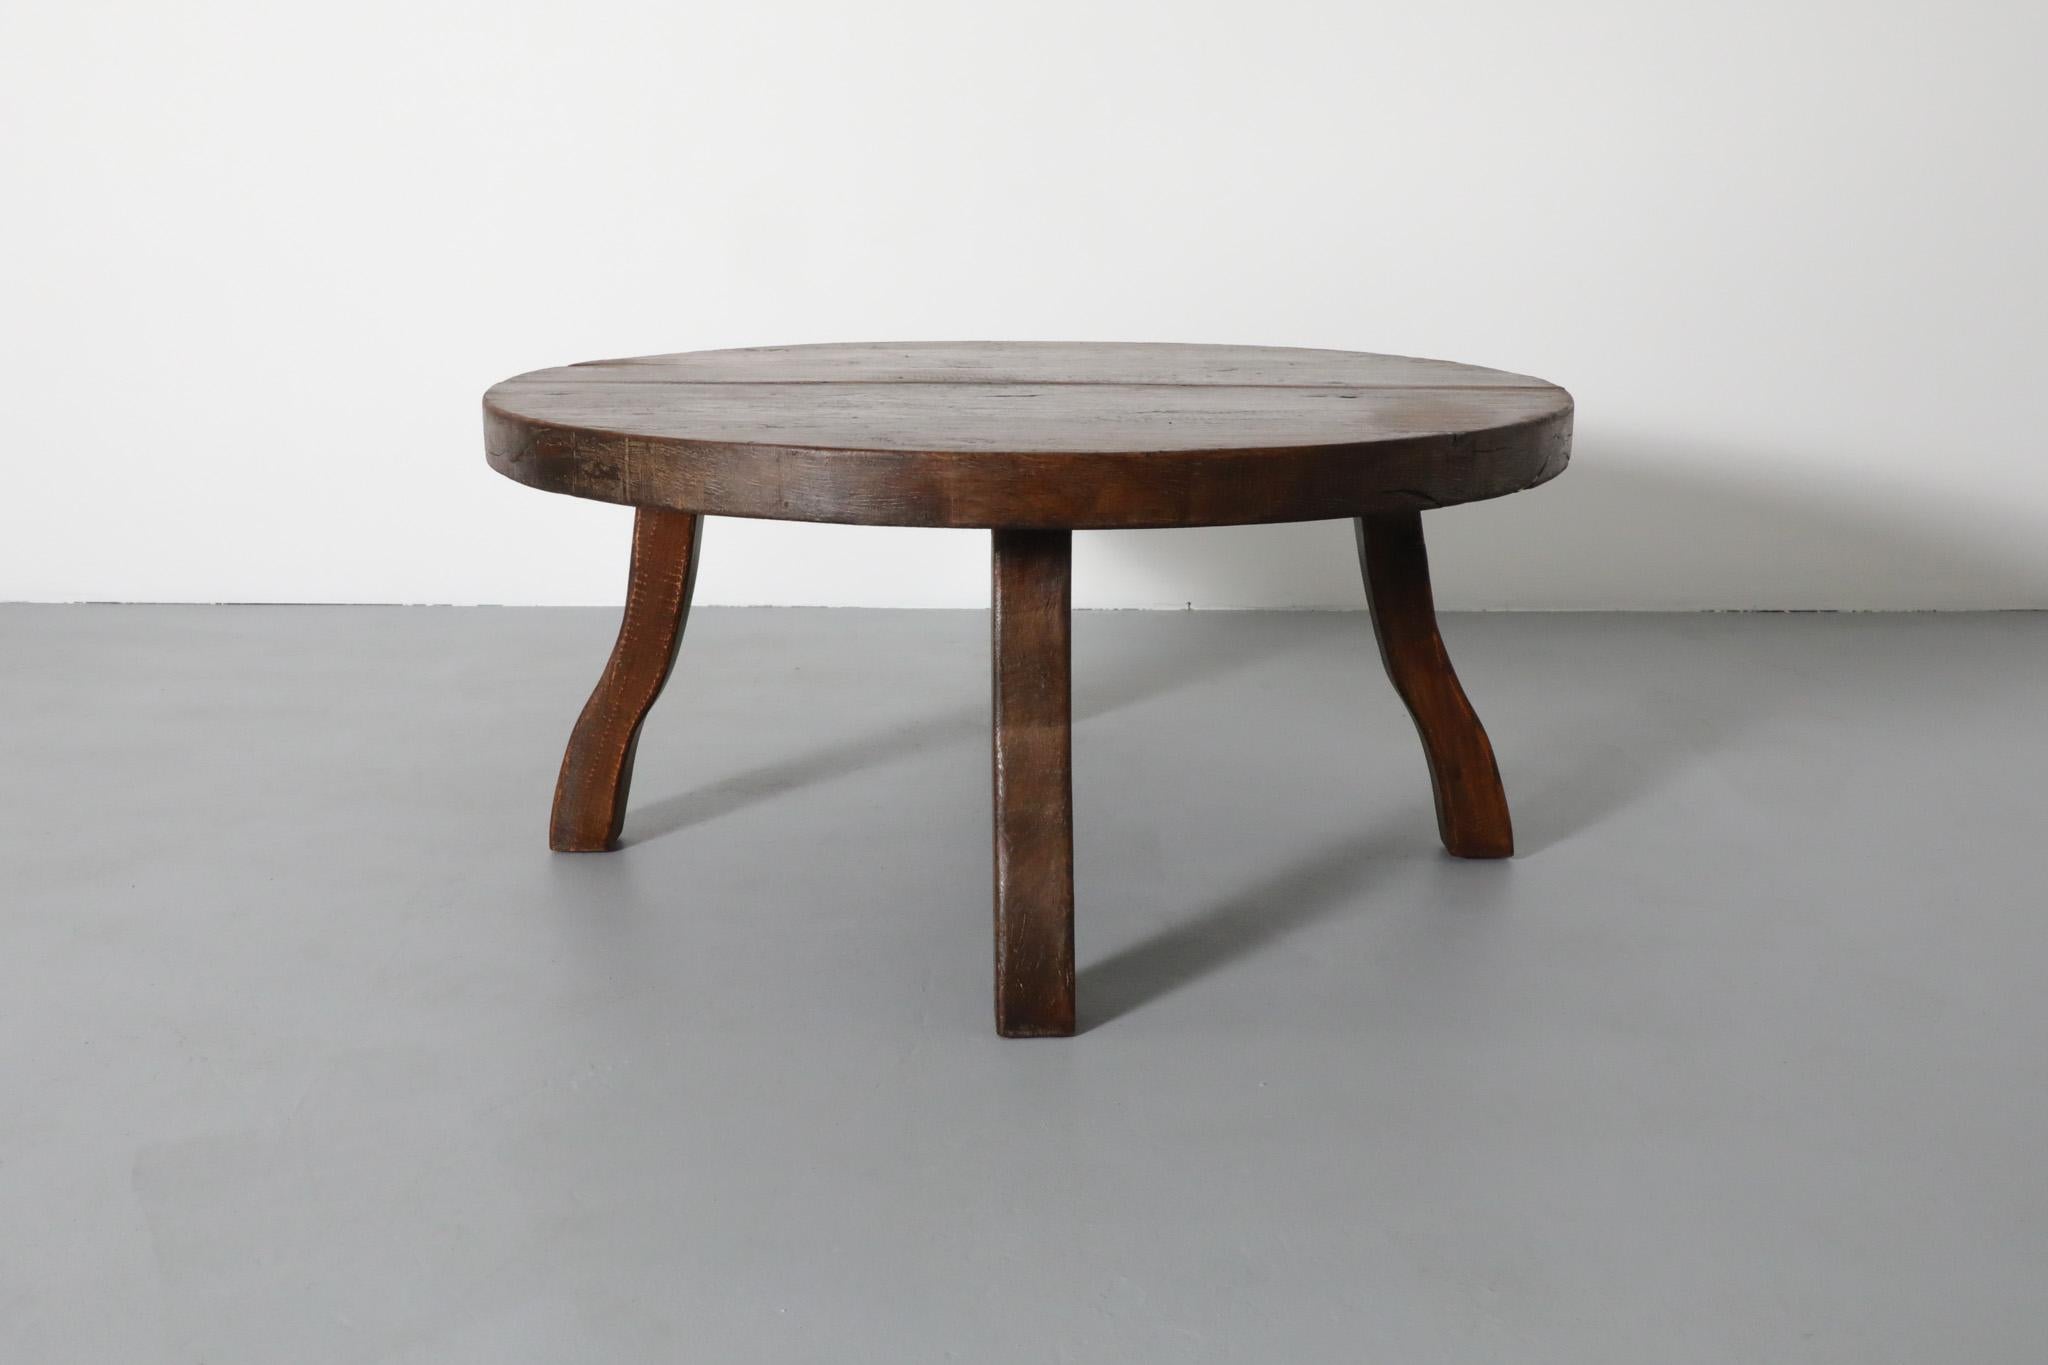 Pierre Chapo Style Brutalist Oak Coffee Table with Curved Legs 1